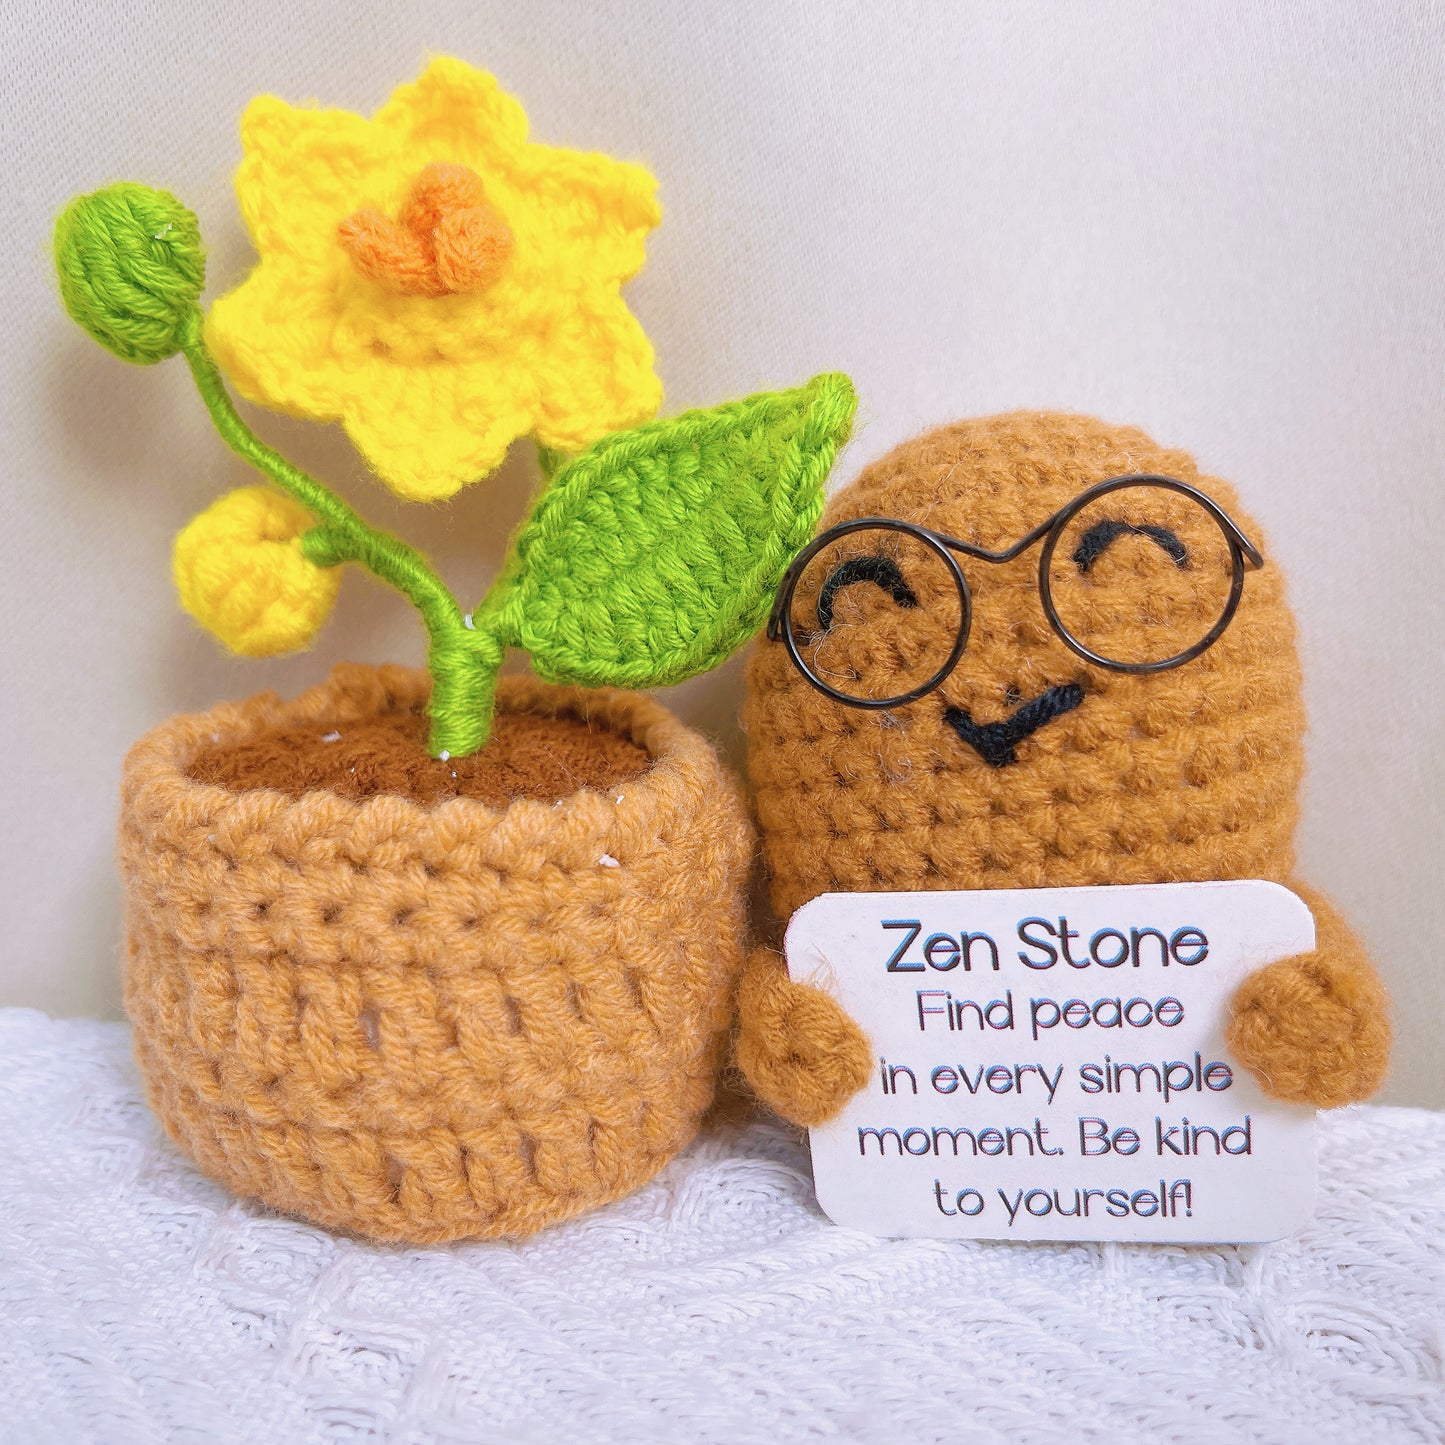 Handcrafted Crochet Happiness Stone with Blossomed Pot (Custom / Personalized Text Available) - Emotional Support Positive Stone Wellness Gift